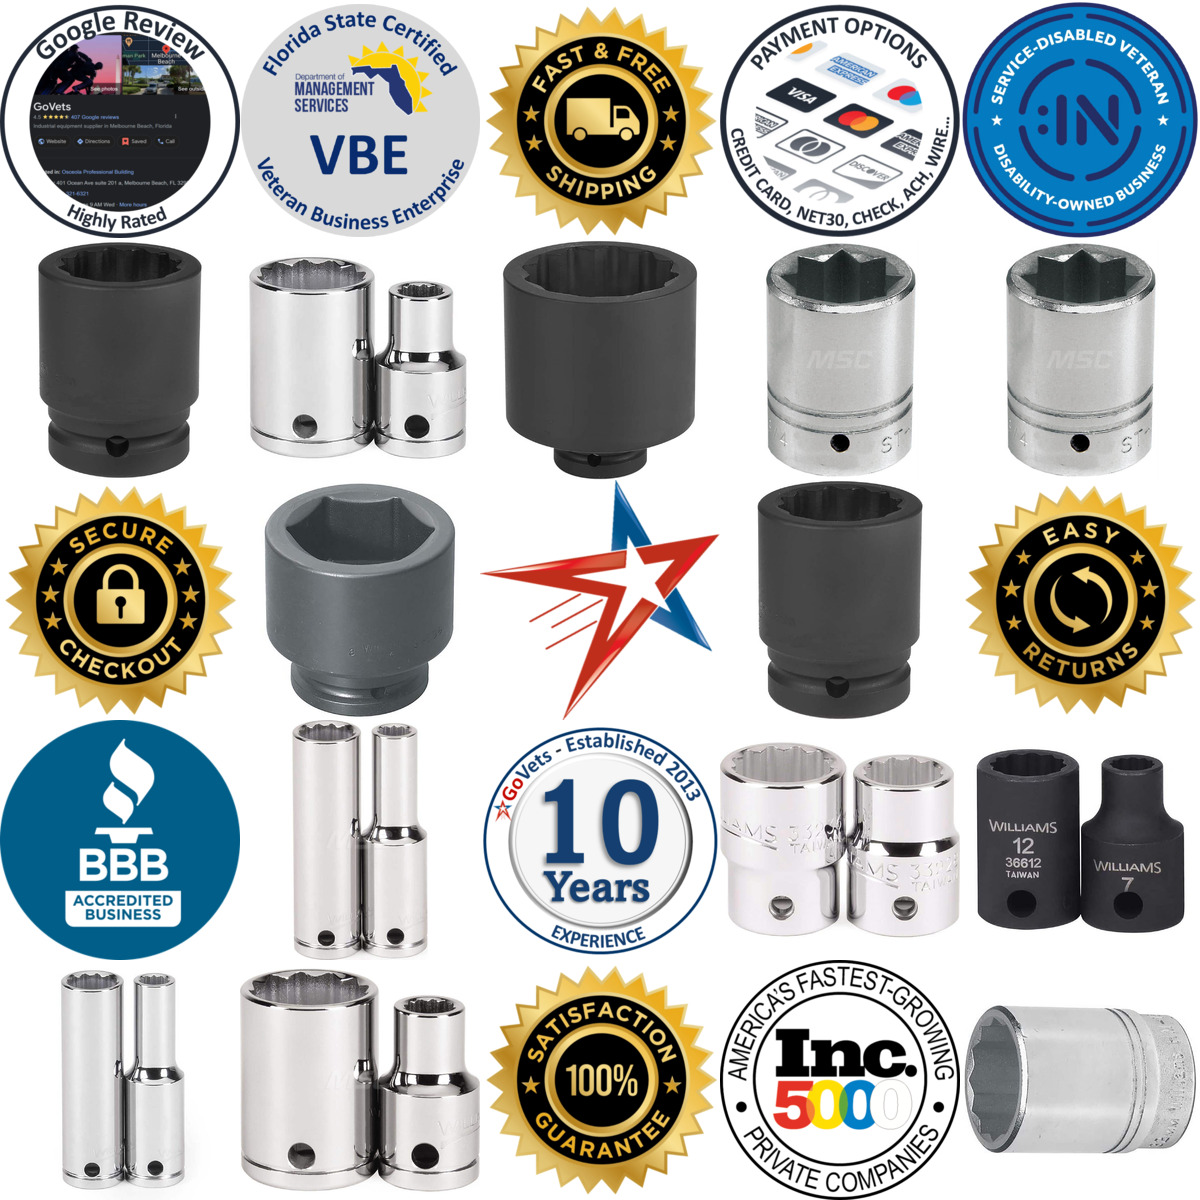 A selection of Williams products on GoVets